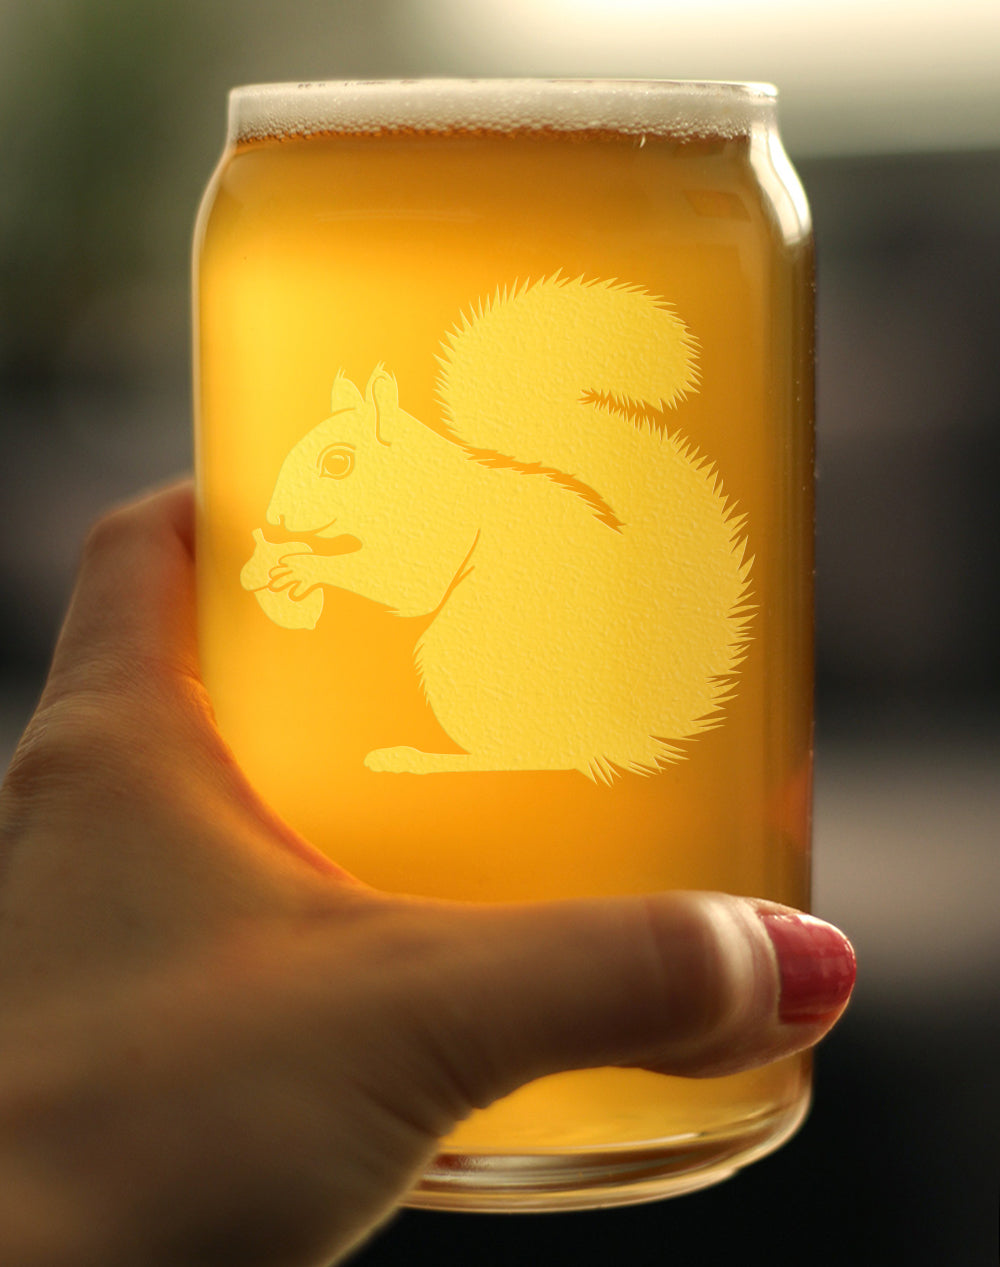 Squirrel Beer Can Pint Glass - Squirrel Gifts and Decor with